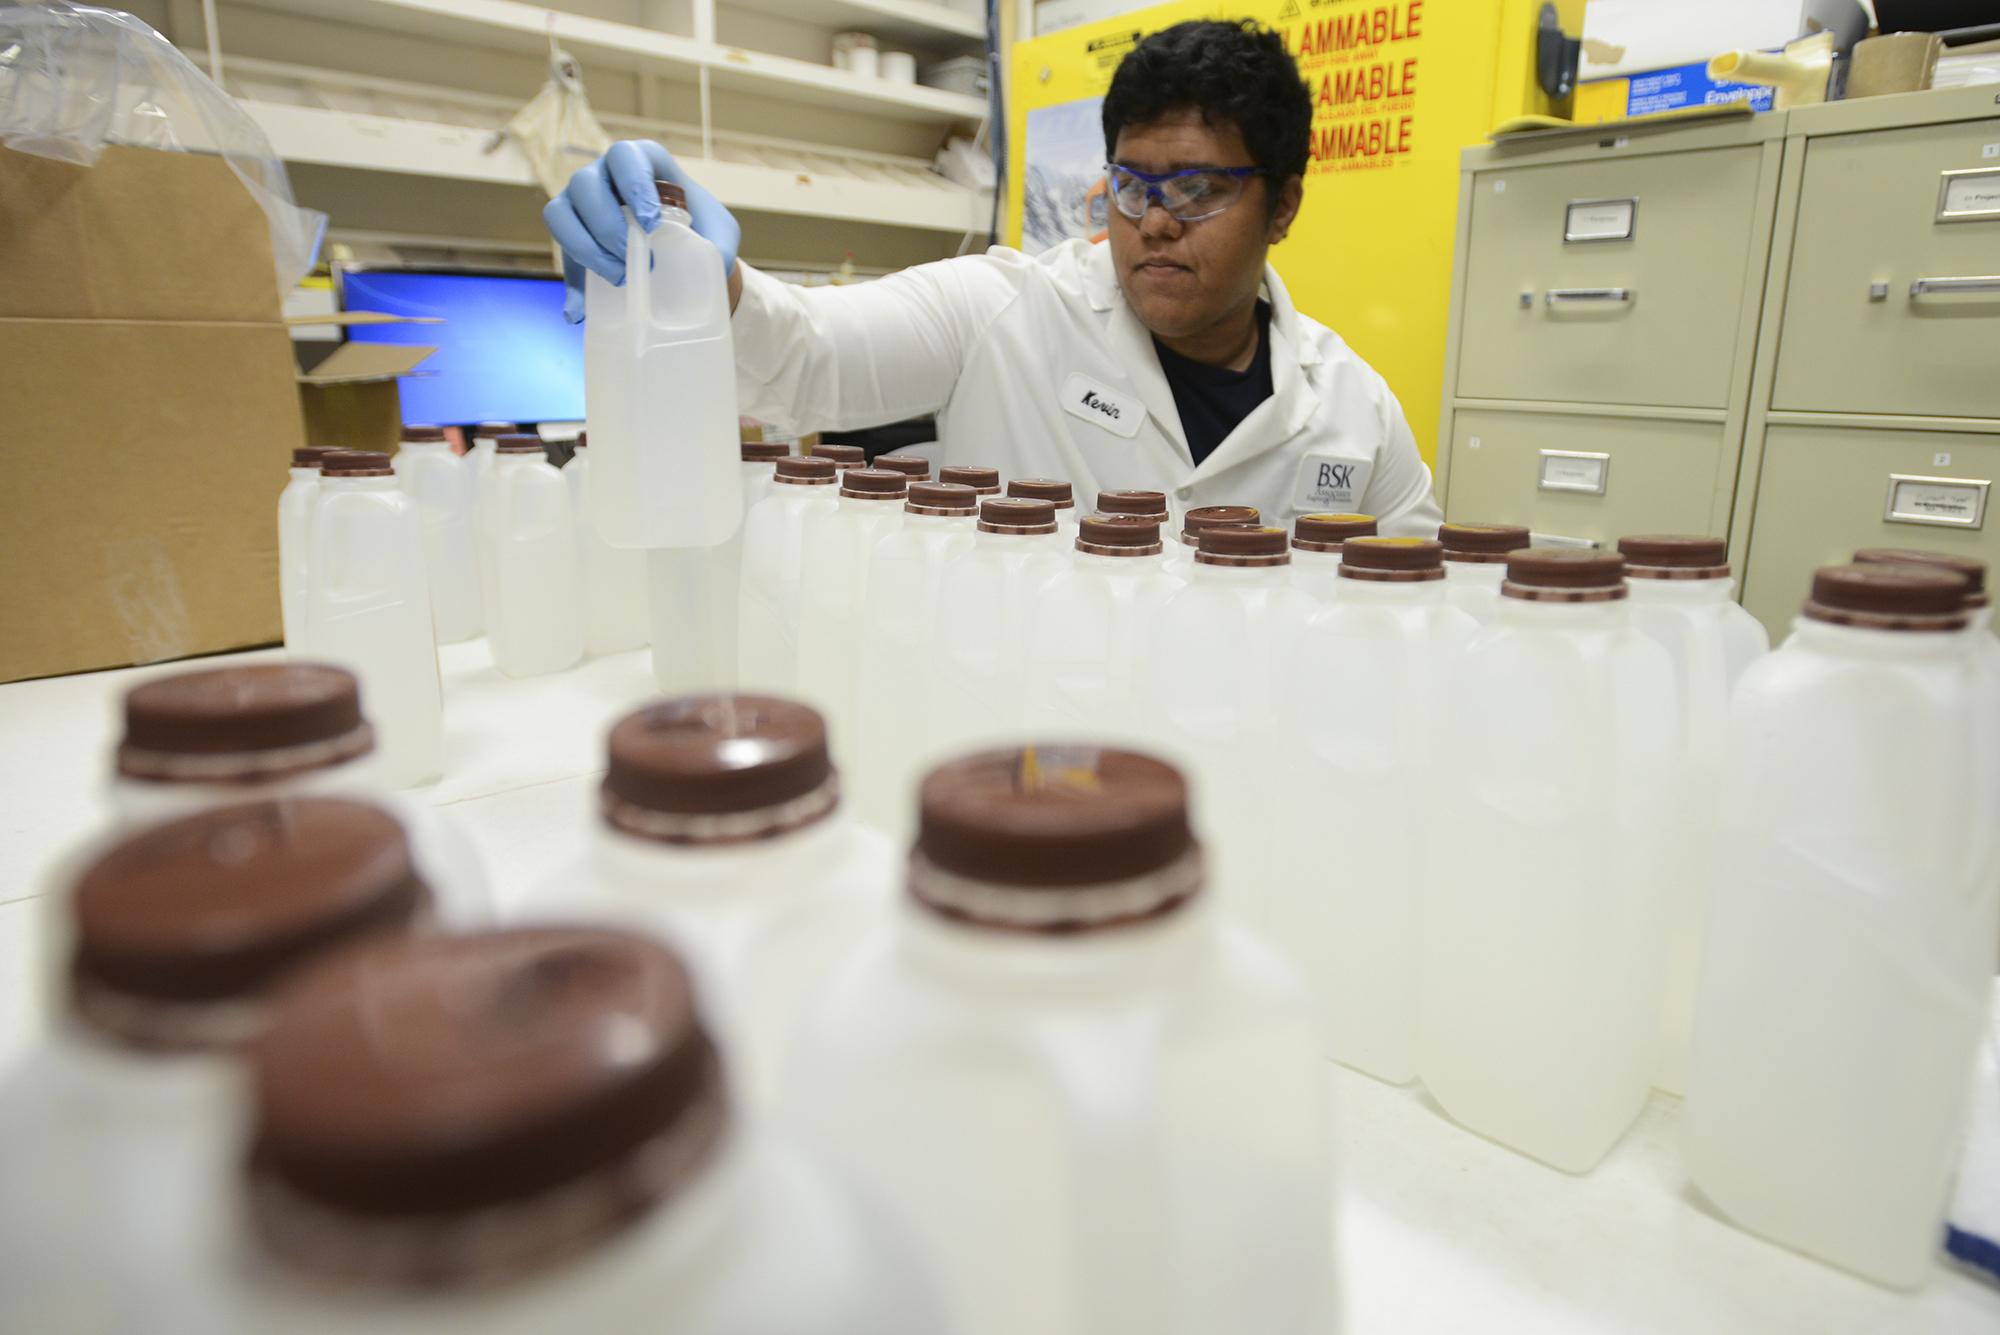 In an Aug. 31, 2016 photo,                                Kevin Churo, a lab assistant at BSK Labs in Vancouver, organizes samples of water last month in a temporary work space set up to deal with an increase in tests sent to the lab due to recent headlines about elevated levels of lead in drinking water at schools. (Ariane Kunze/The Columbian via AP)